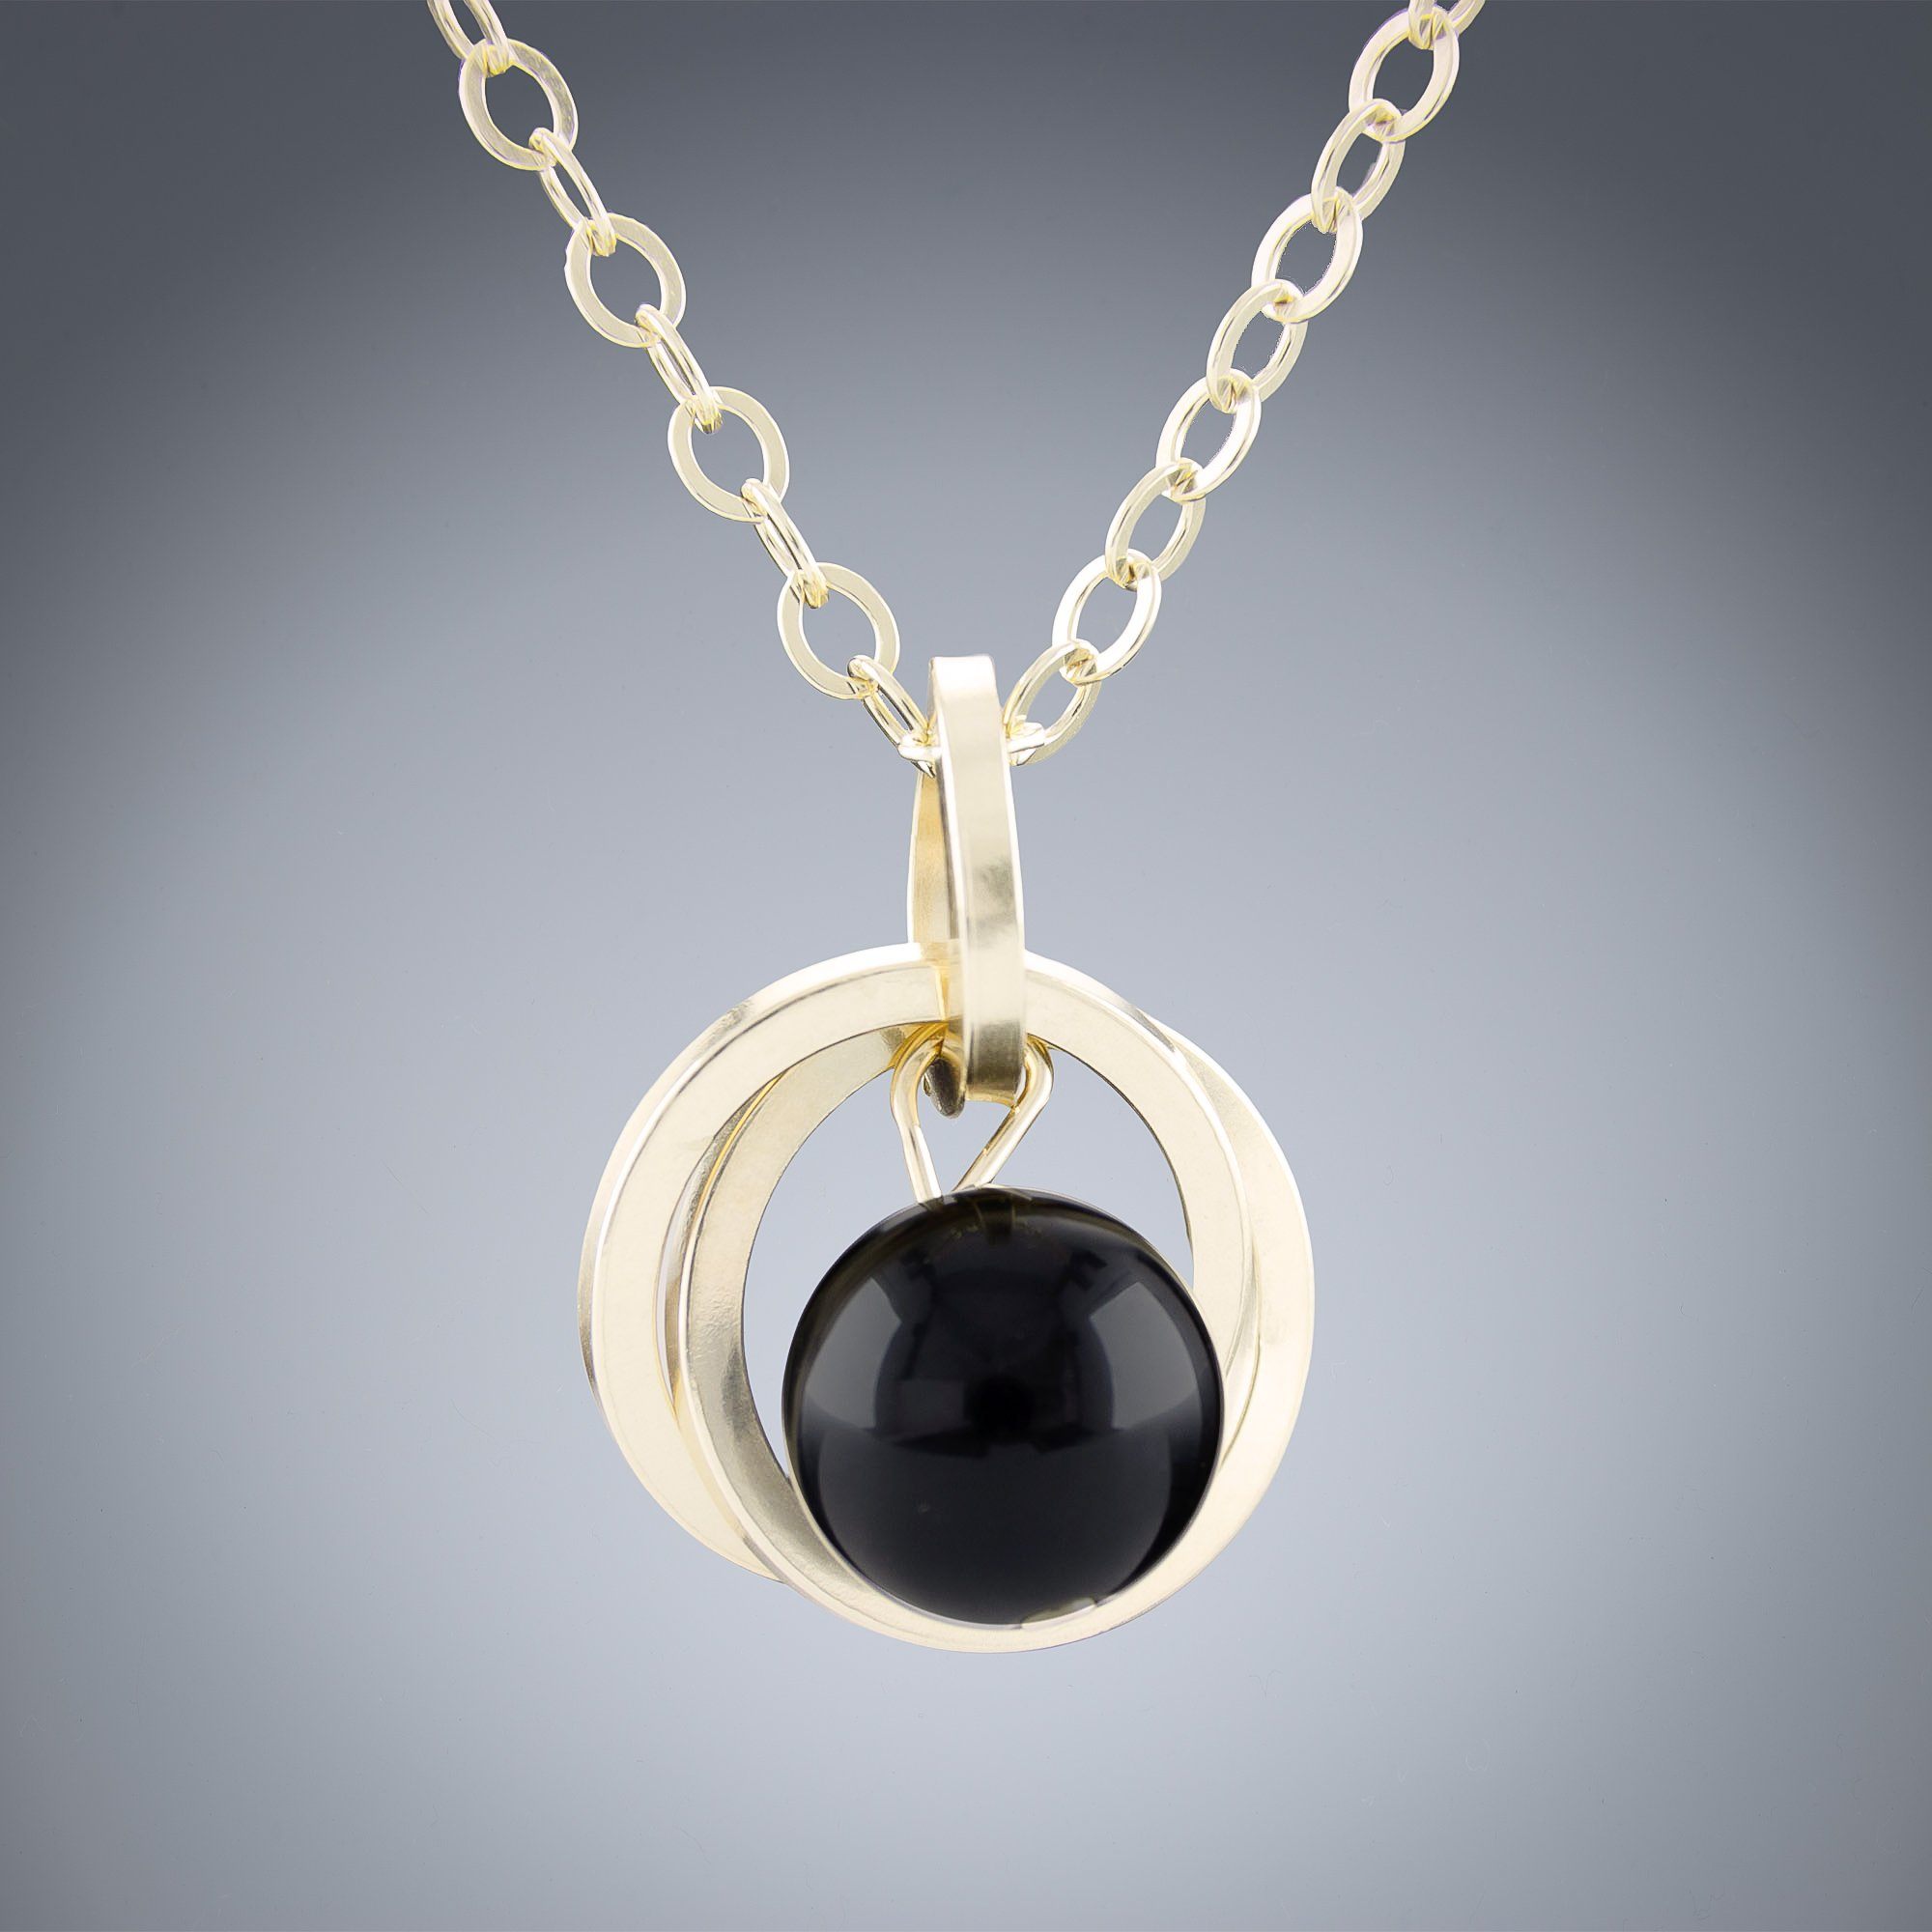 Handcrafted Black Onyx Genuine Gemstone Pendant Necklace in 14K Yellow Gold Fill